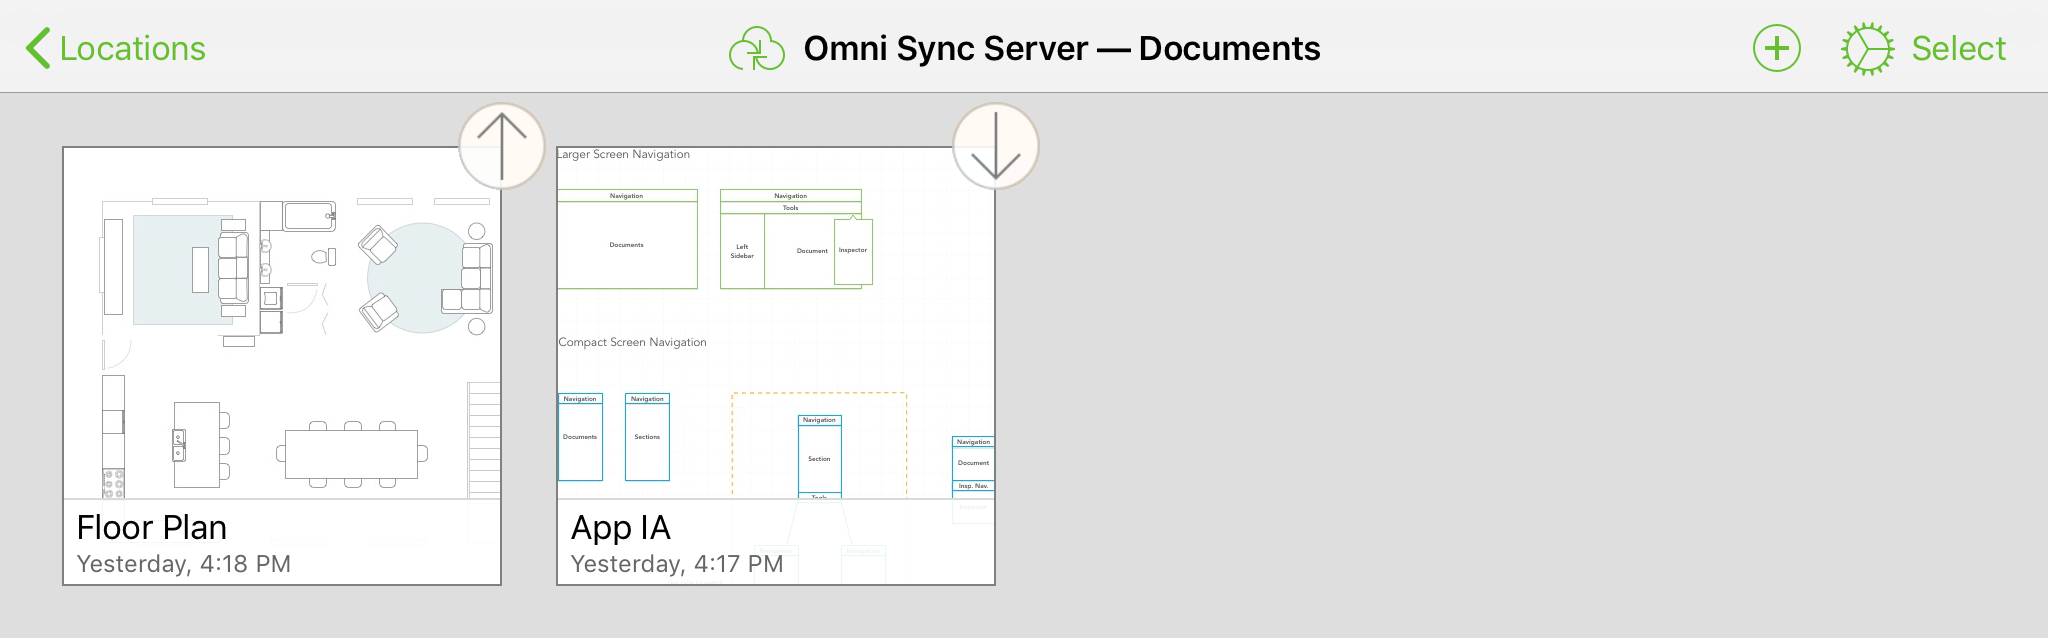 A synced OmniPresence folder with up and down arrow icons attached to some of the document thumbnails, indicating that a sync is in process for those files.